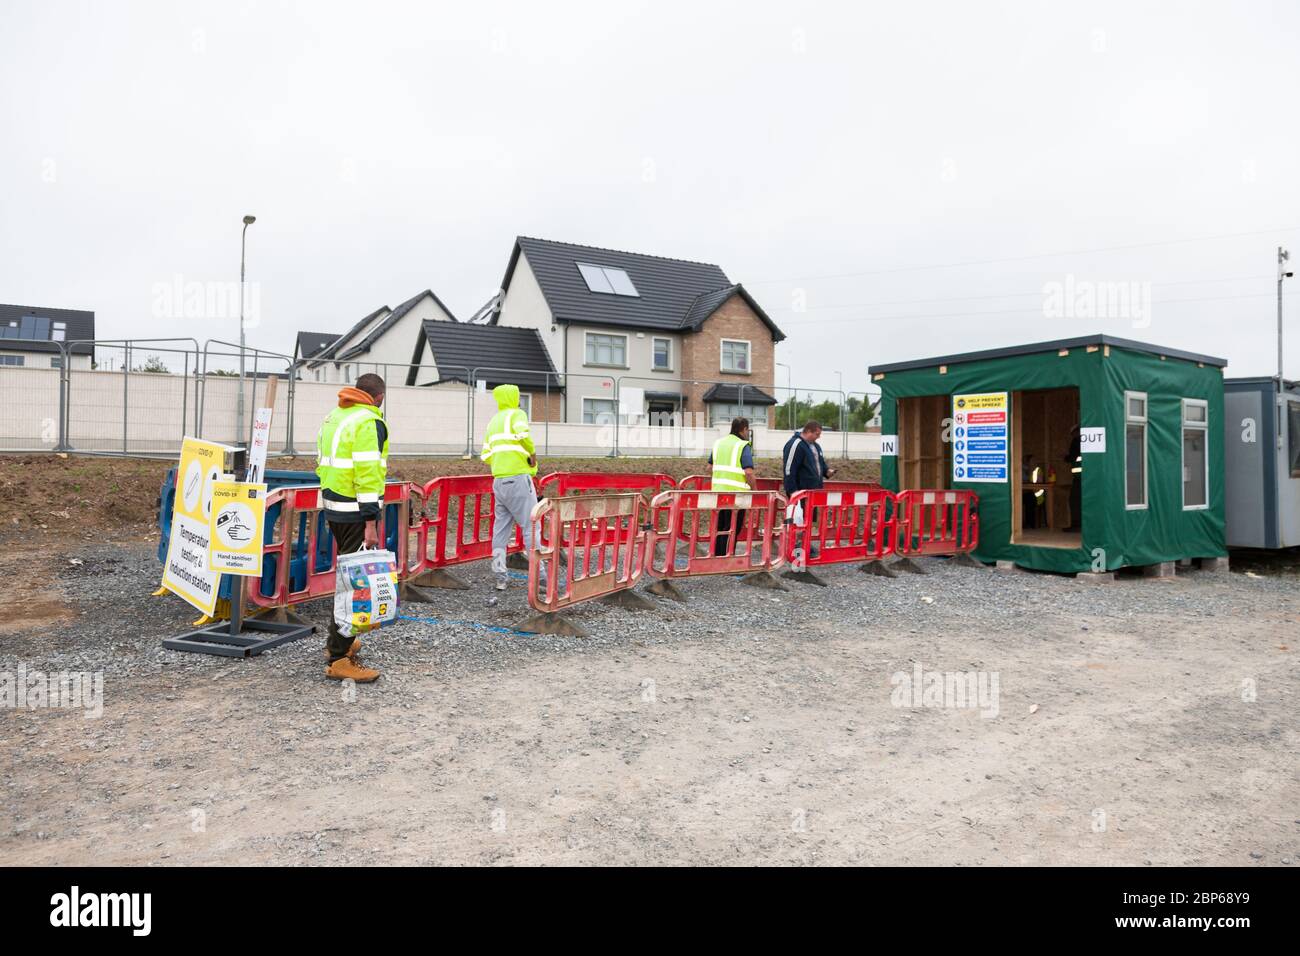 Carrigaline, Cork, Ireland. 18th May, 2020.On the first day of phase one with the easing of Covid-19 restrictions works queue at the temperature testiong station at the Astra construction site in Janeville, Carrigaline, Co. Cork, Ireland. - Credit; David Creedon / Alamy Live News Stock Photo